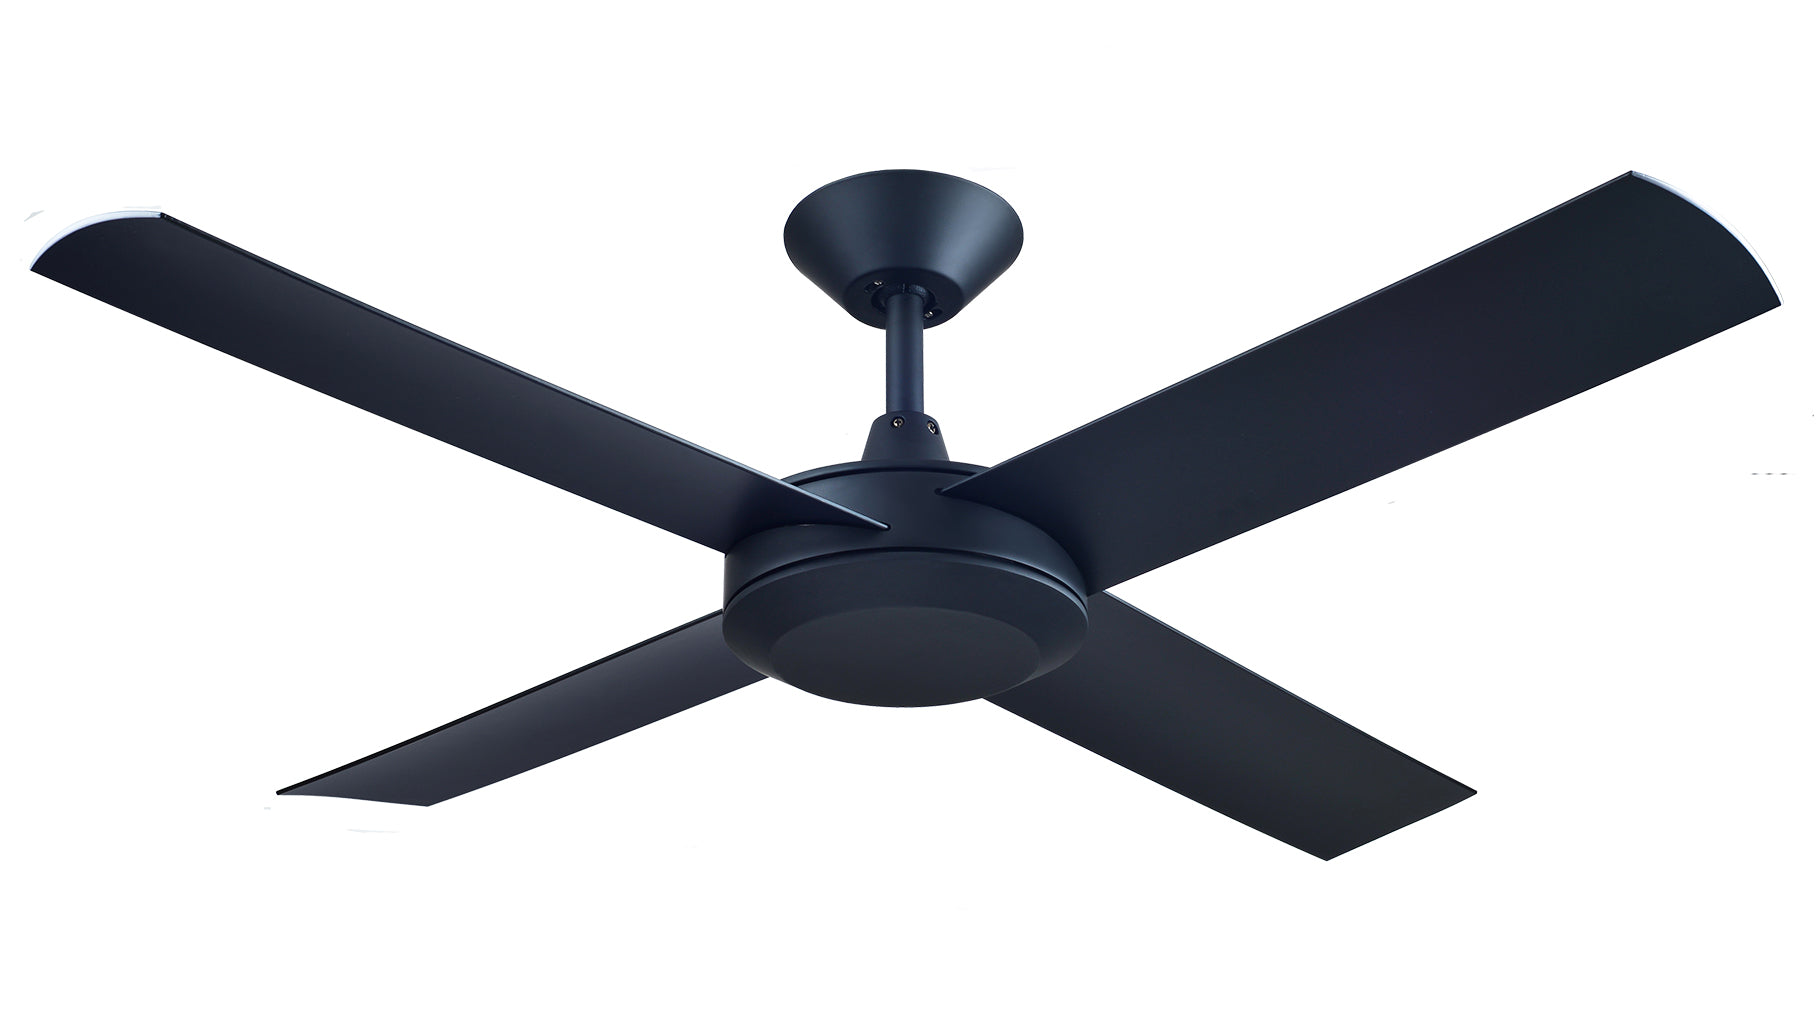 52 Eco 2 Ceiling Fan By Hunter Pacific